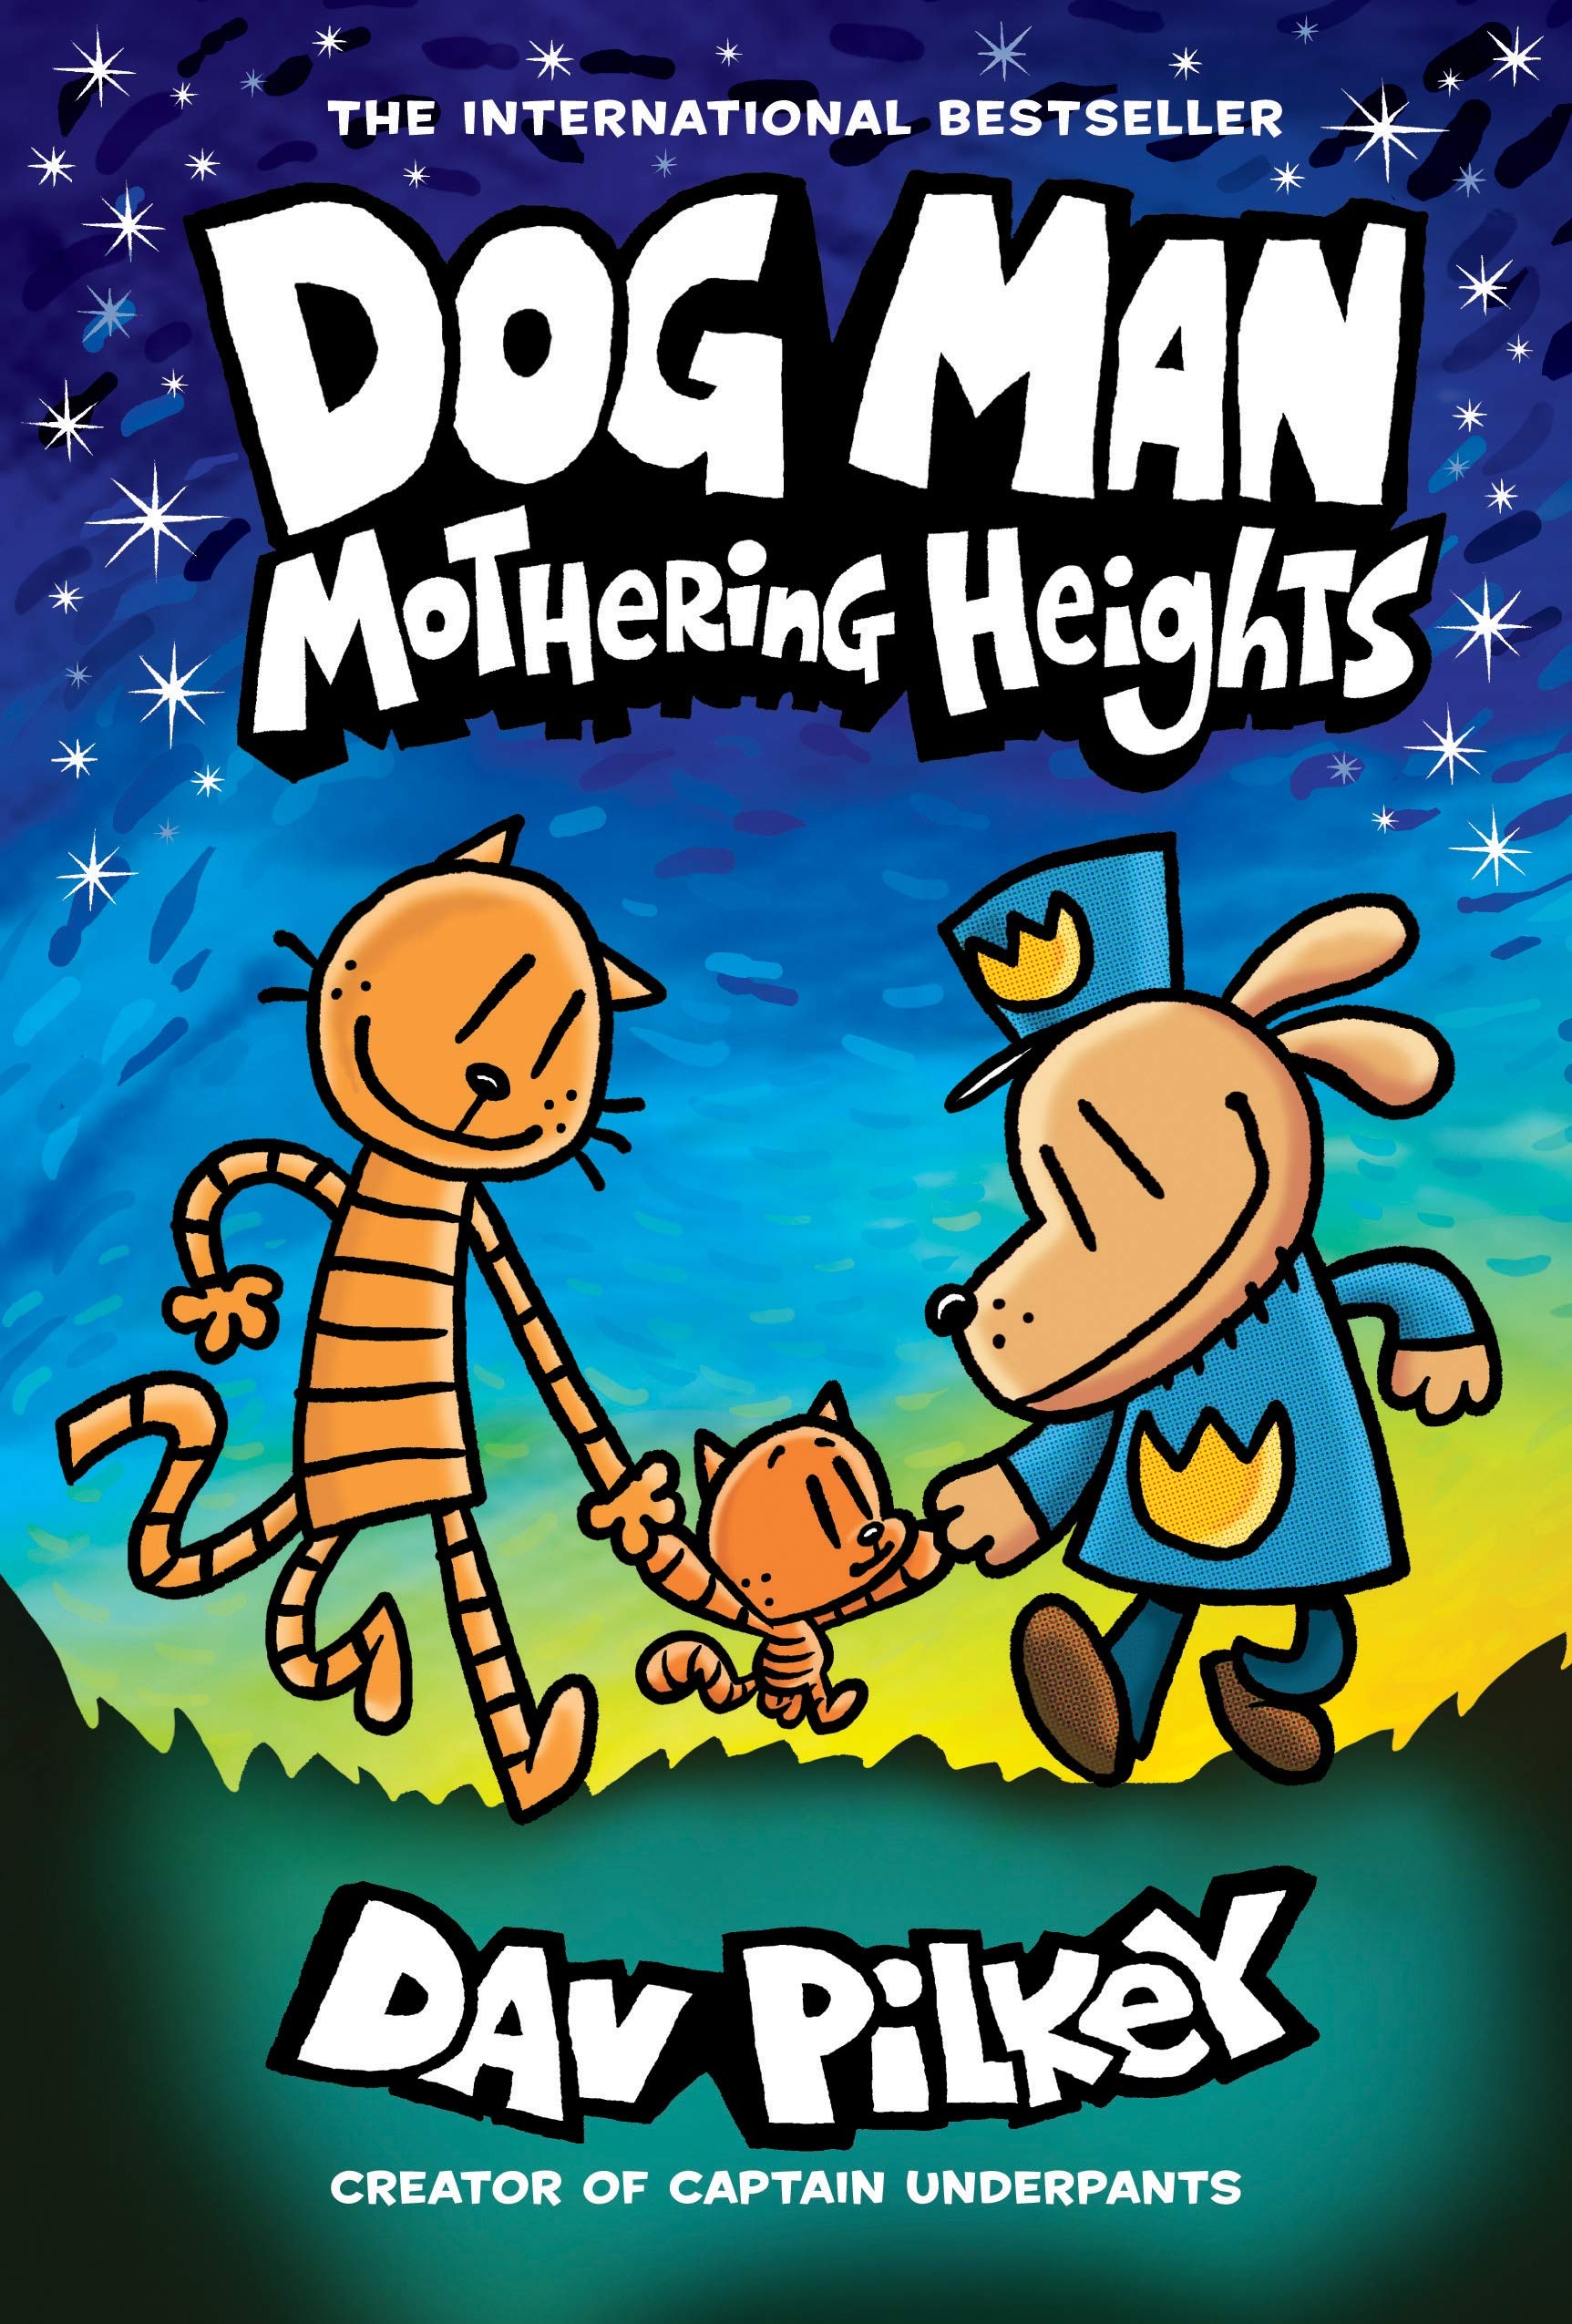 book review on dog man